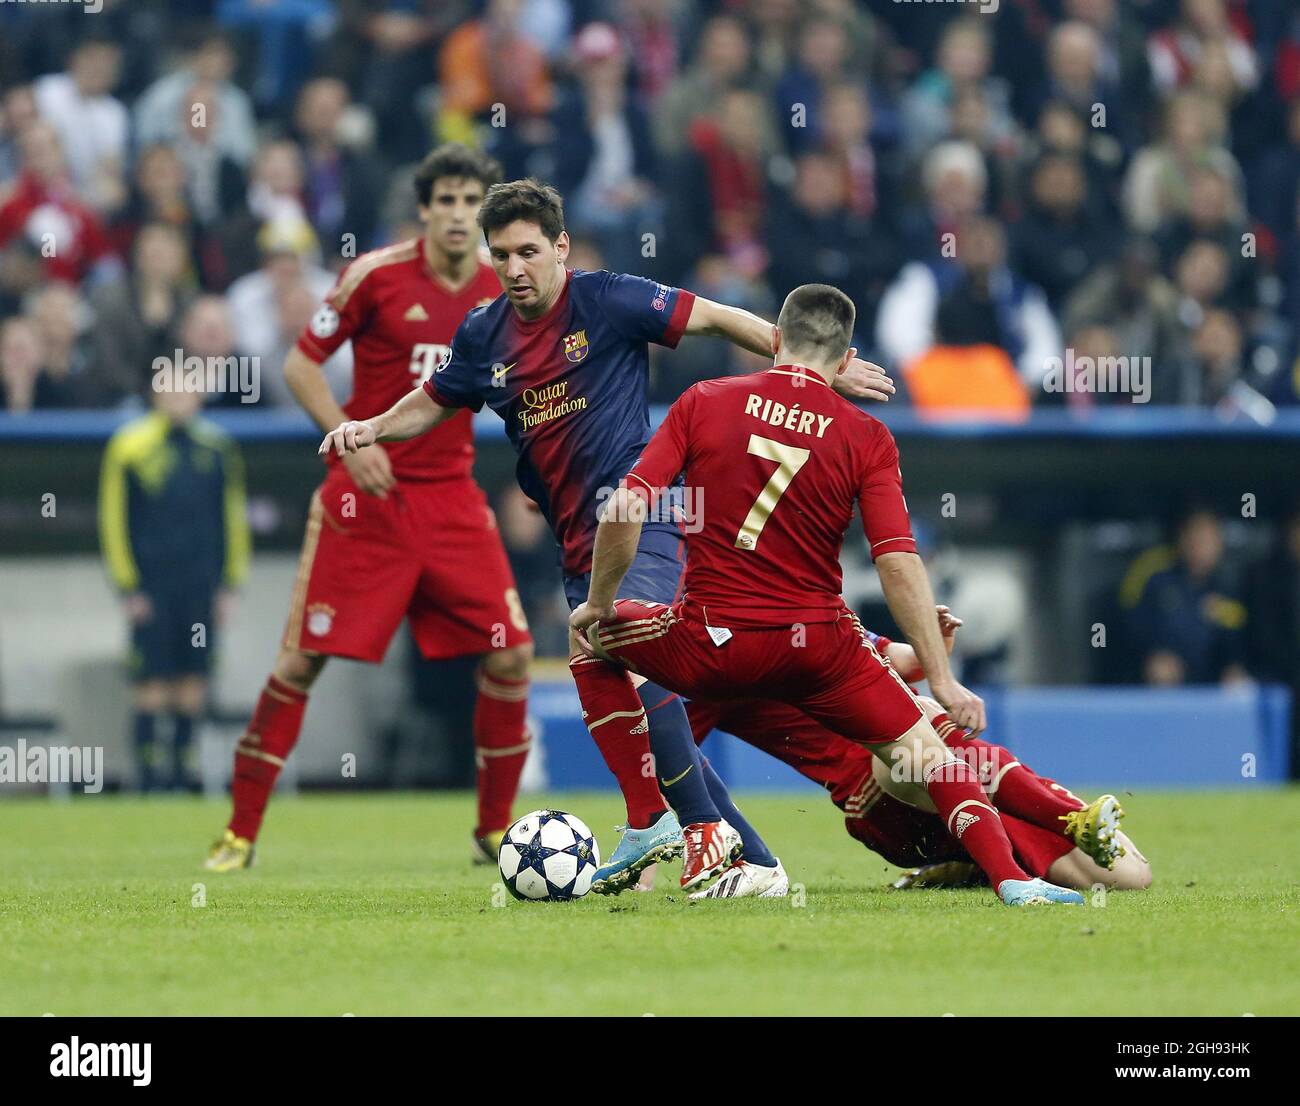 Munich's Franck Ribery tussles with Barcelona's Lionel Messi during the  League Cup Semi Final 1st Leg match between Bayern Munich and Barcelona at  the Allianz Arena in Munich on April 23, 2013.